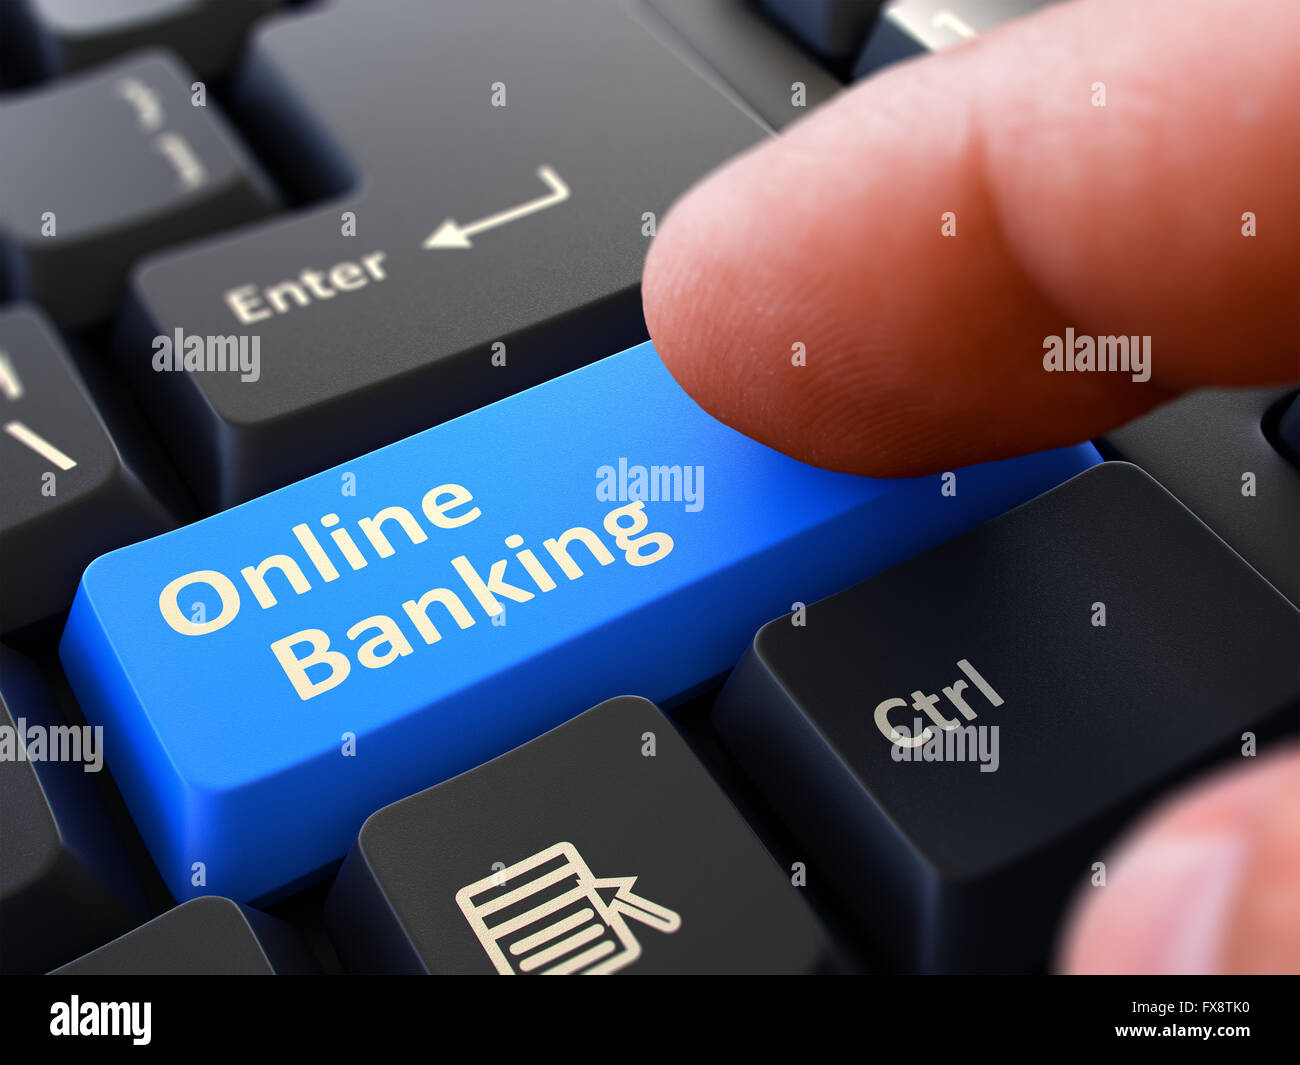 Online Banking - Concept on Blue Keyboard Button. Stock Photo